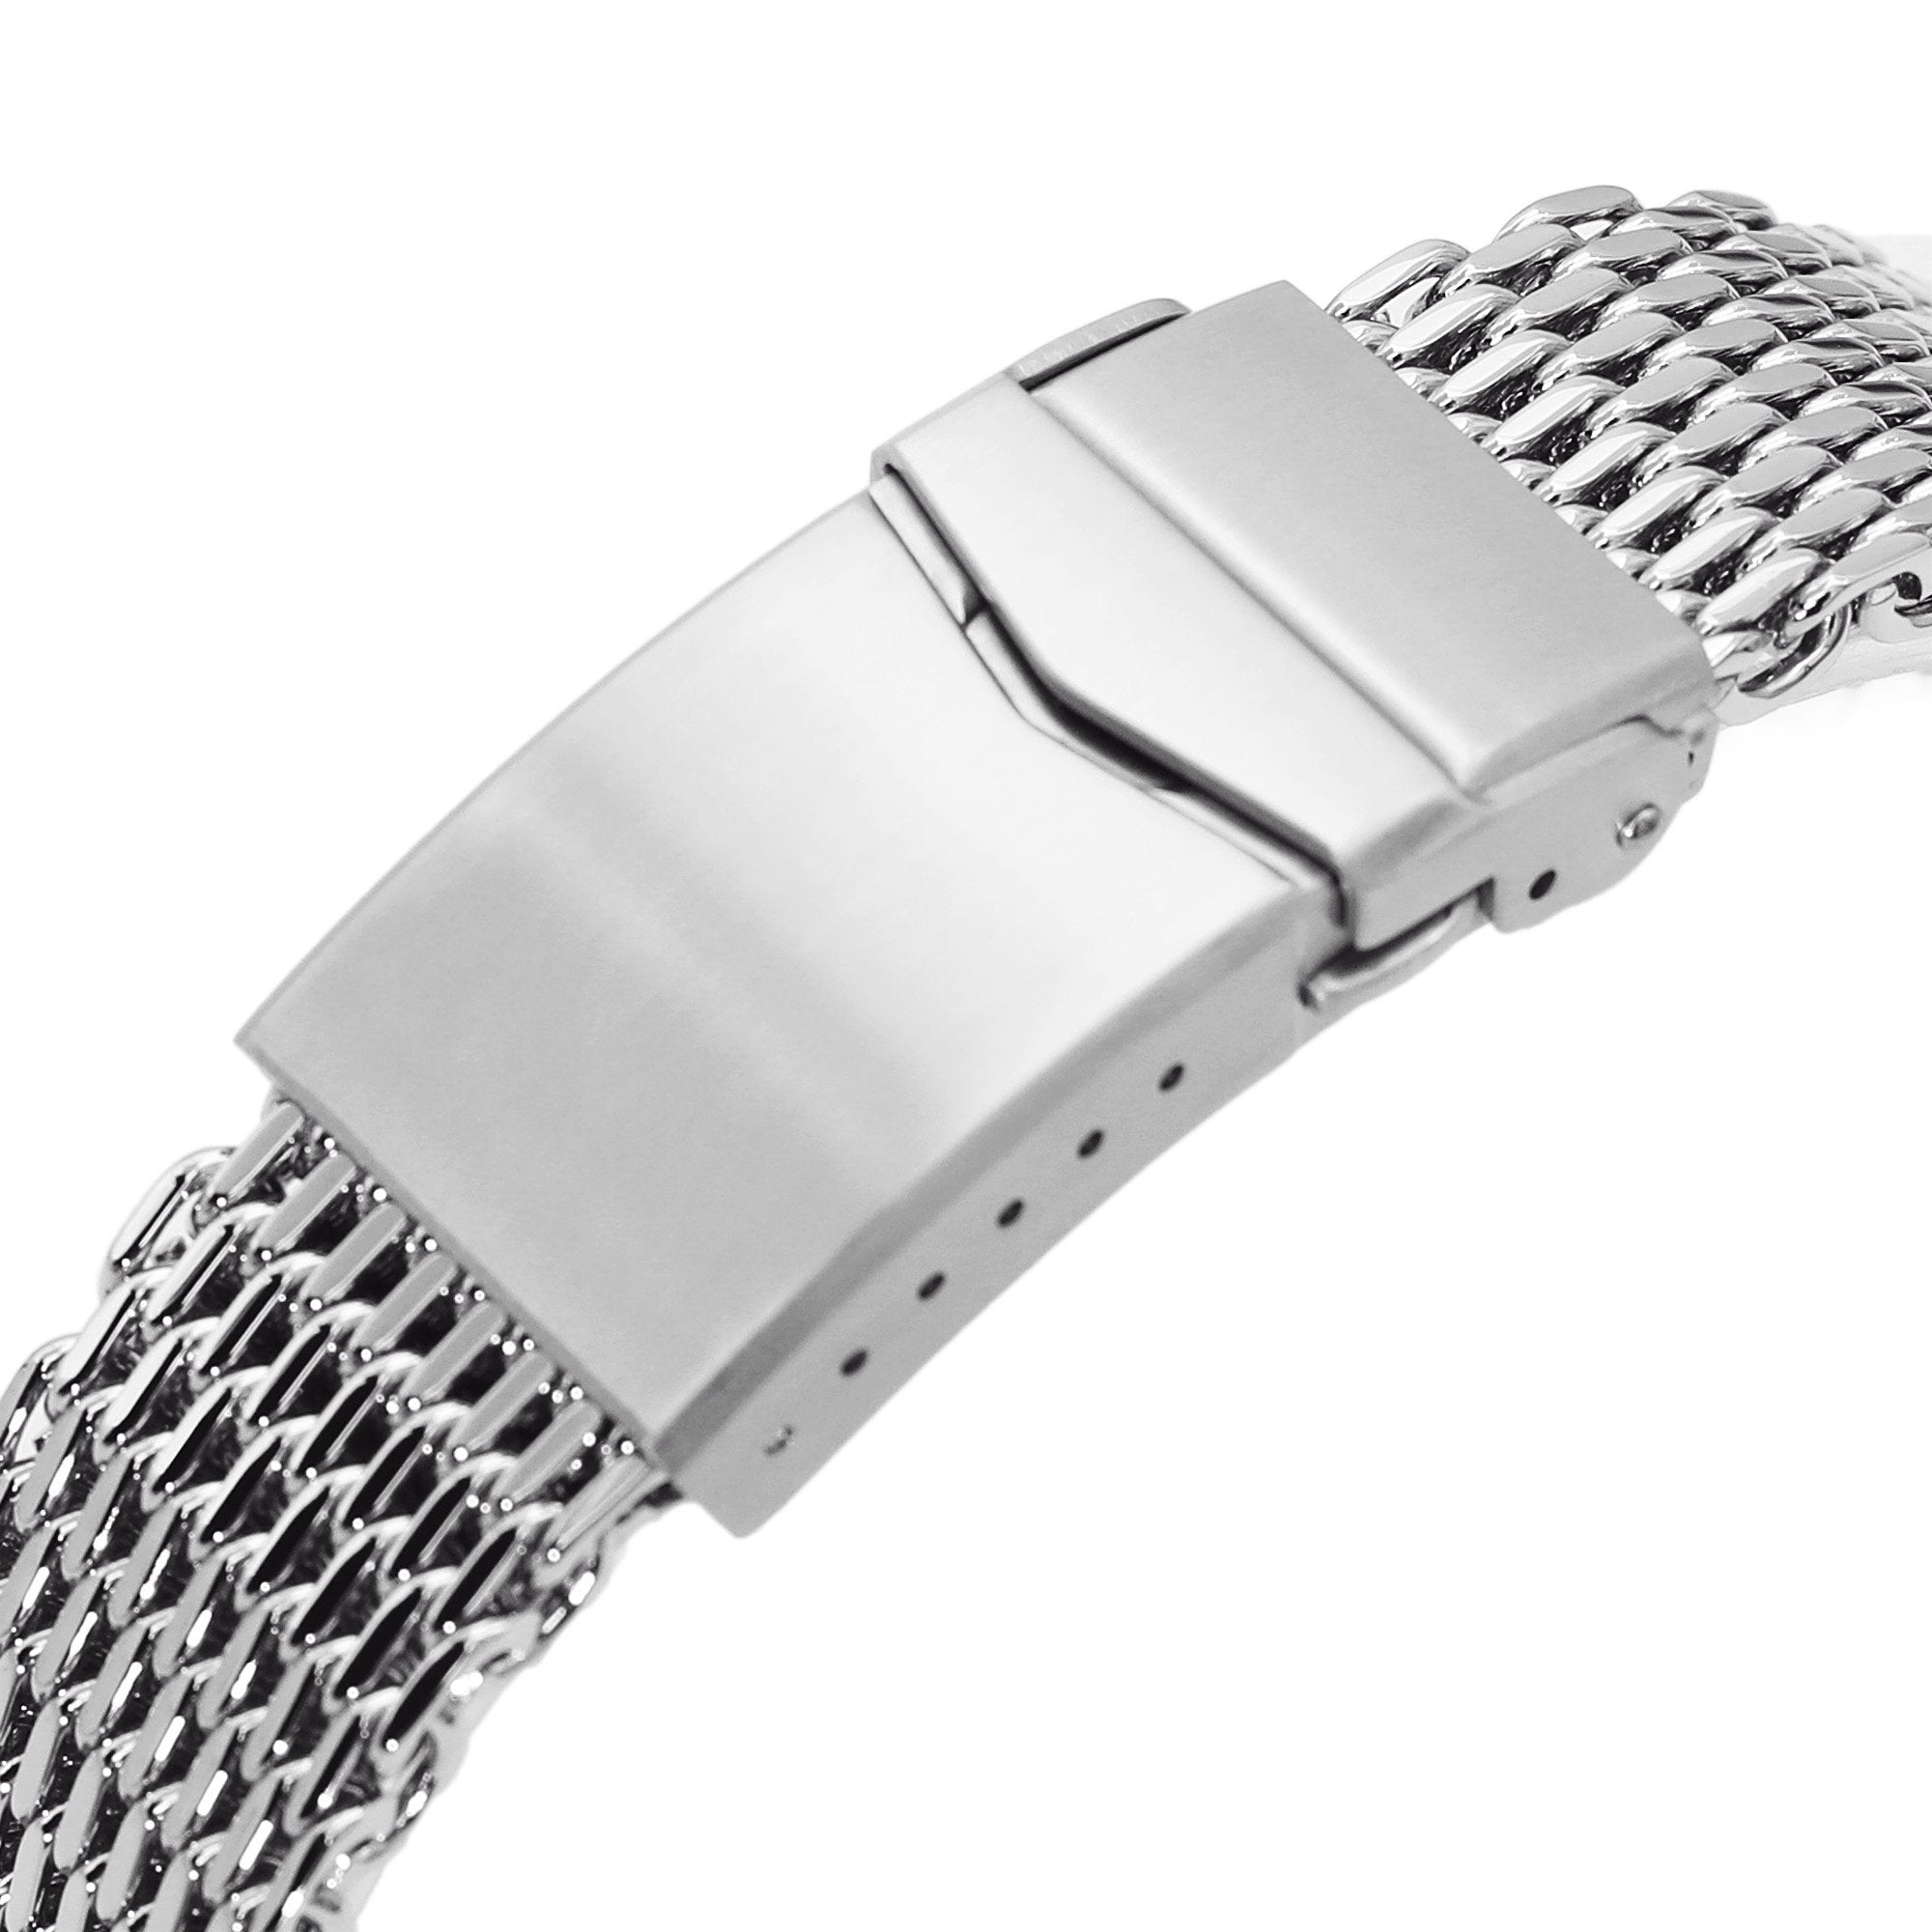 22mm Tapered "SHARK" Mesh Band Stainless Steel Watch Bracelet V-Clasp Polished Strapcode Watch Bands